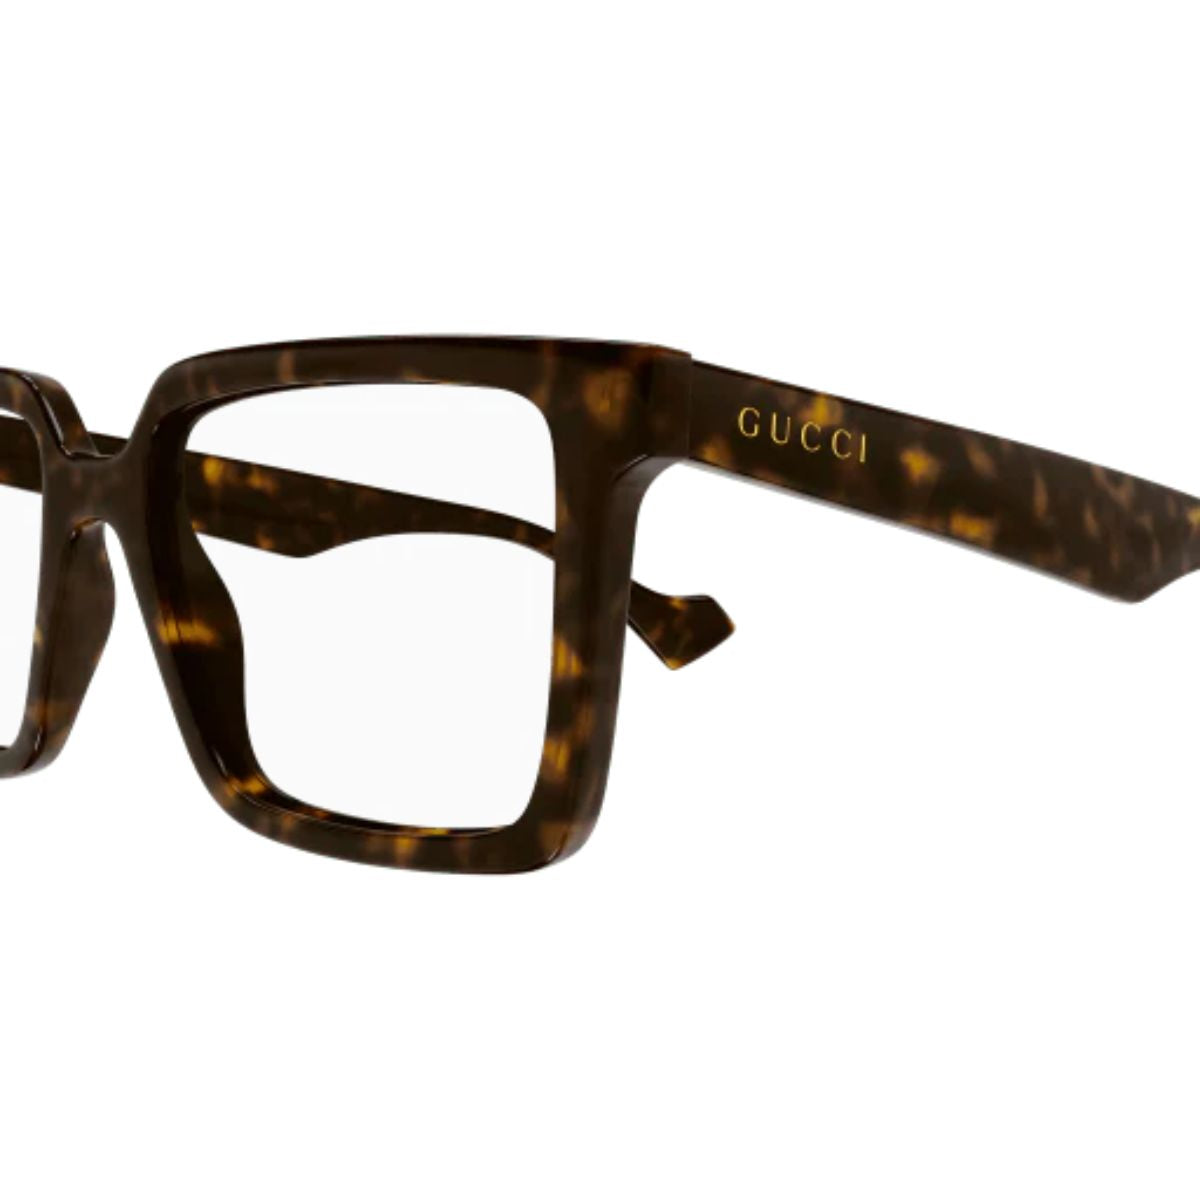 "Gucci 1540O 002 Frame stylish for men and women glasses frames at optorium"